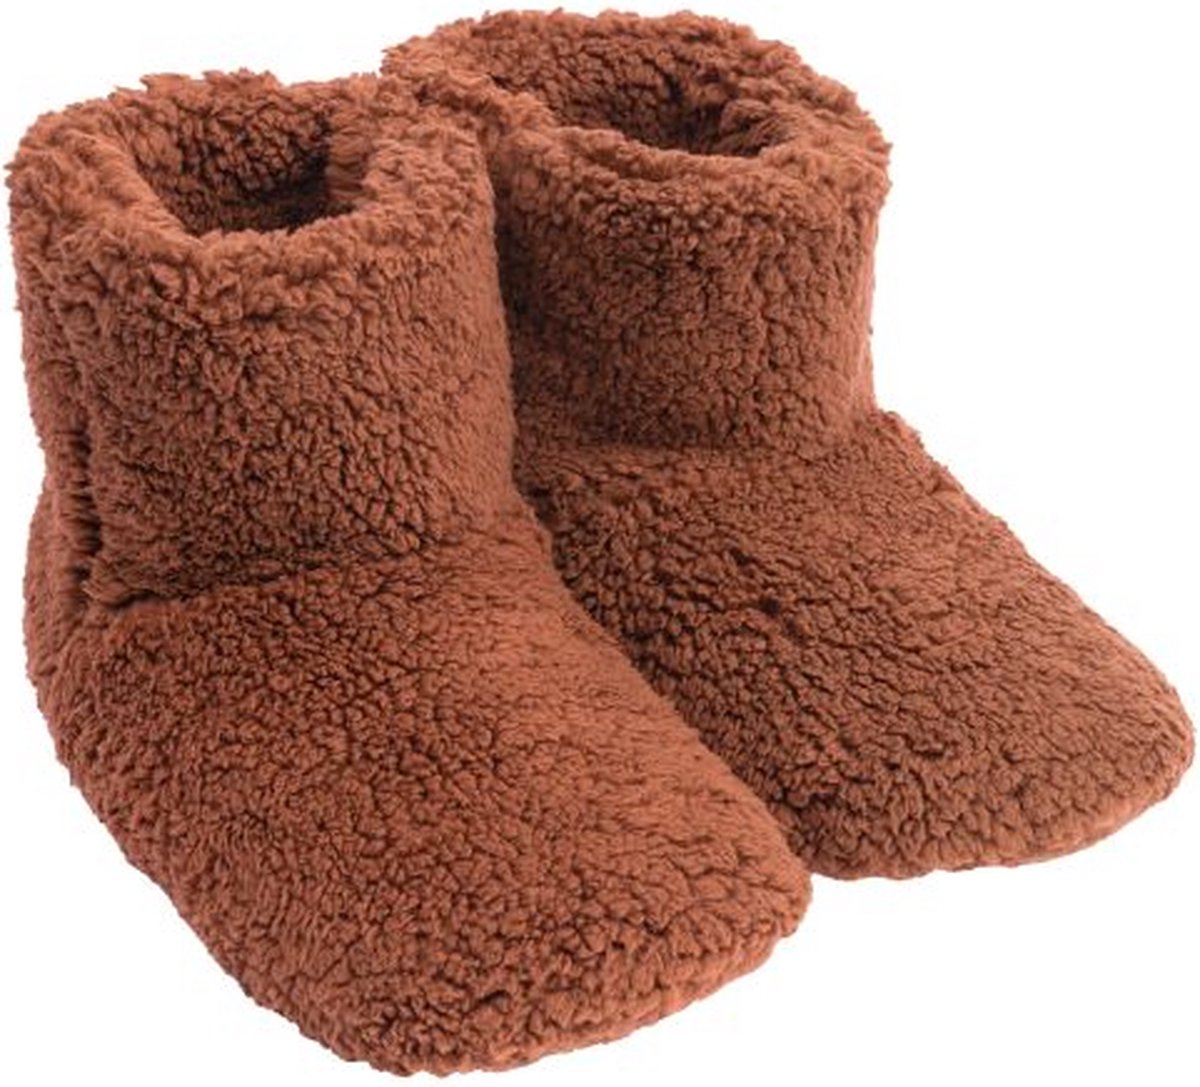 Mistral Home - Pantoffels boots teddy - maat 38/39 - 100% polyester - Bruin